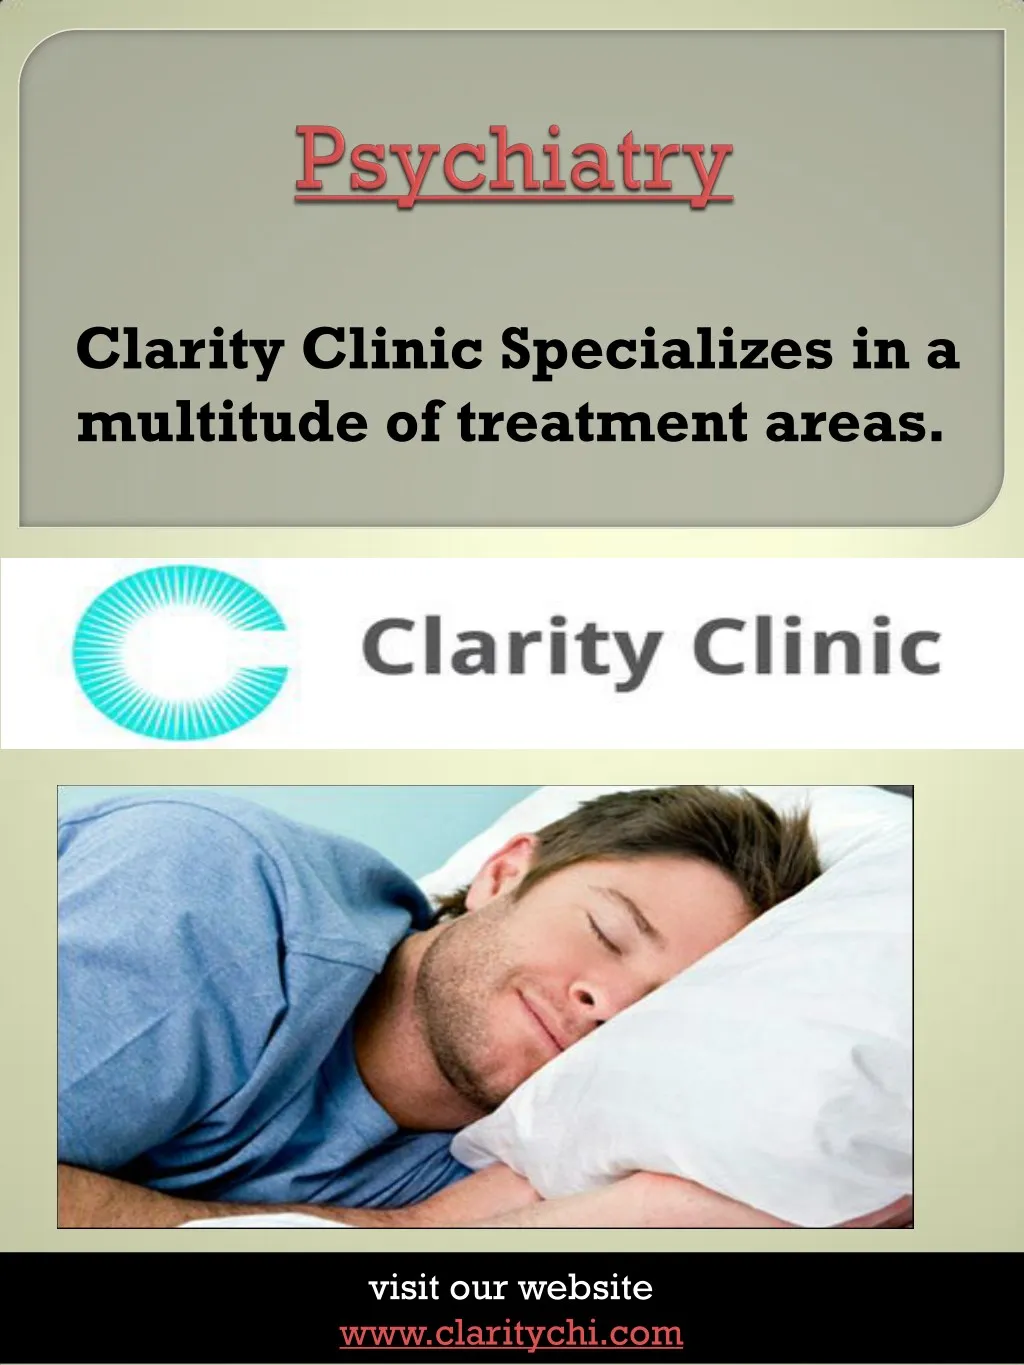 clarity clinic specializes in a multitude